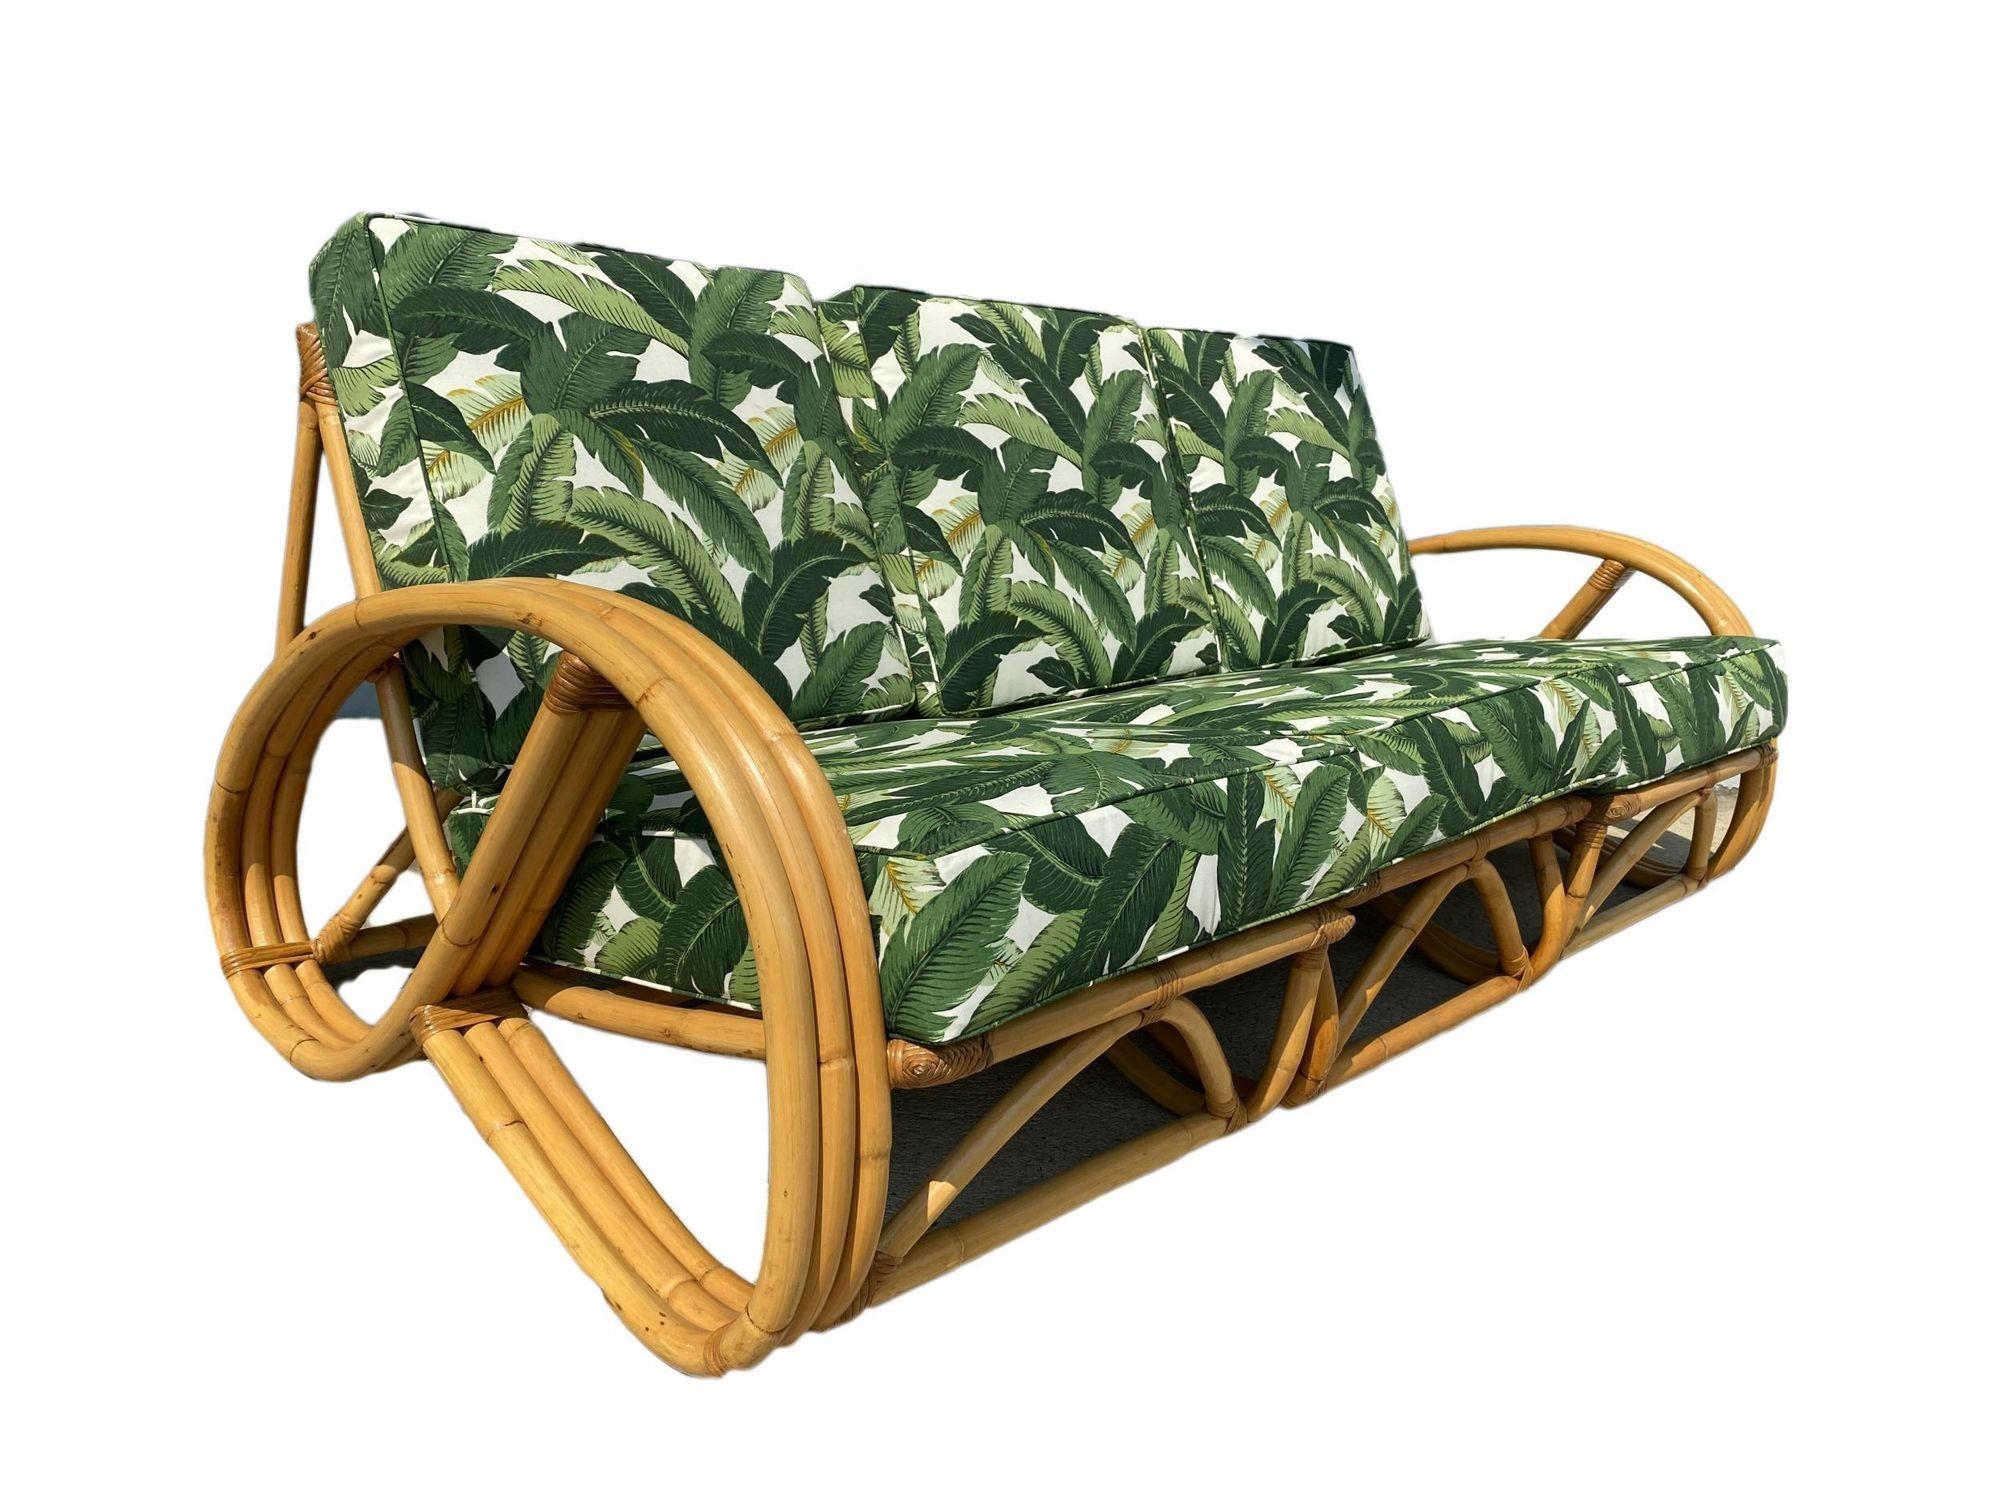 Three-strand 3/4 reverse pretzel arm rattan living room set with a sectional sofa and lounge chair sofa features a decorative wave detail on both sides of the base. Also included in the set is a matching ottoman. Reminiscent of the sofas done by